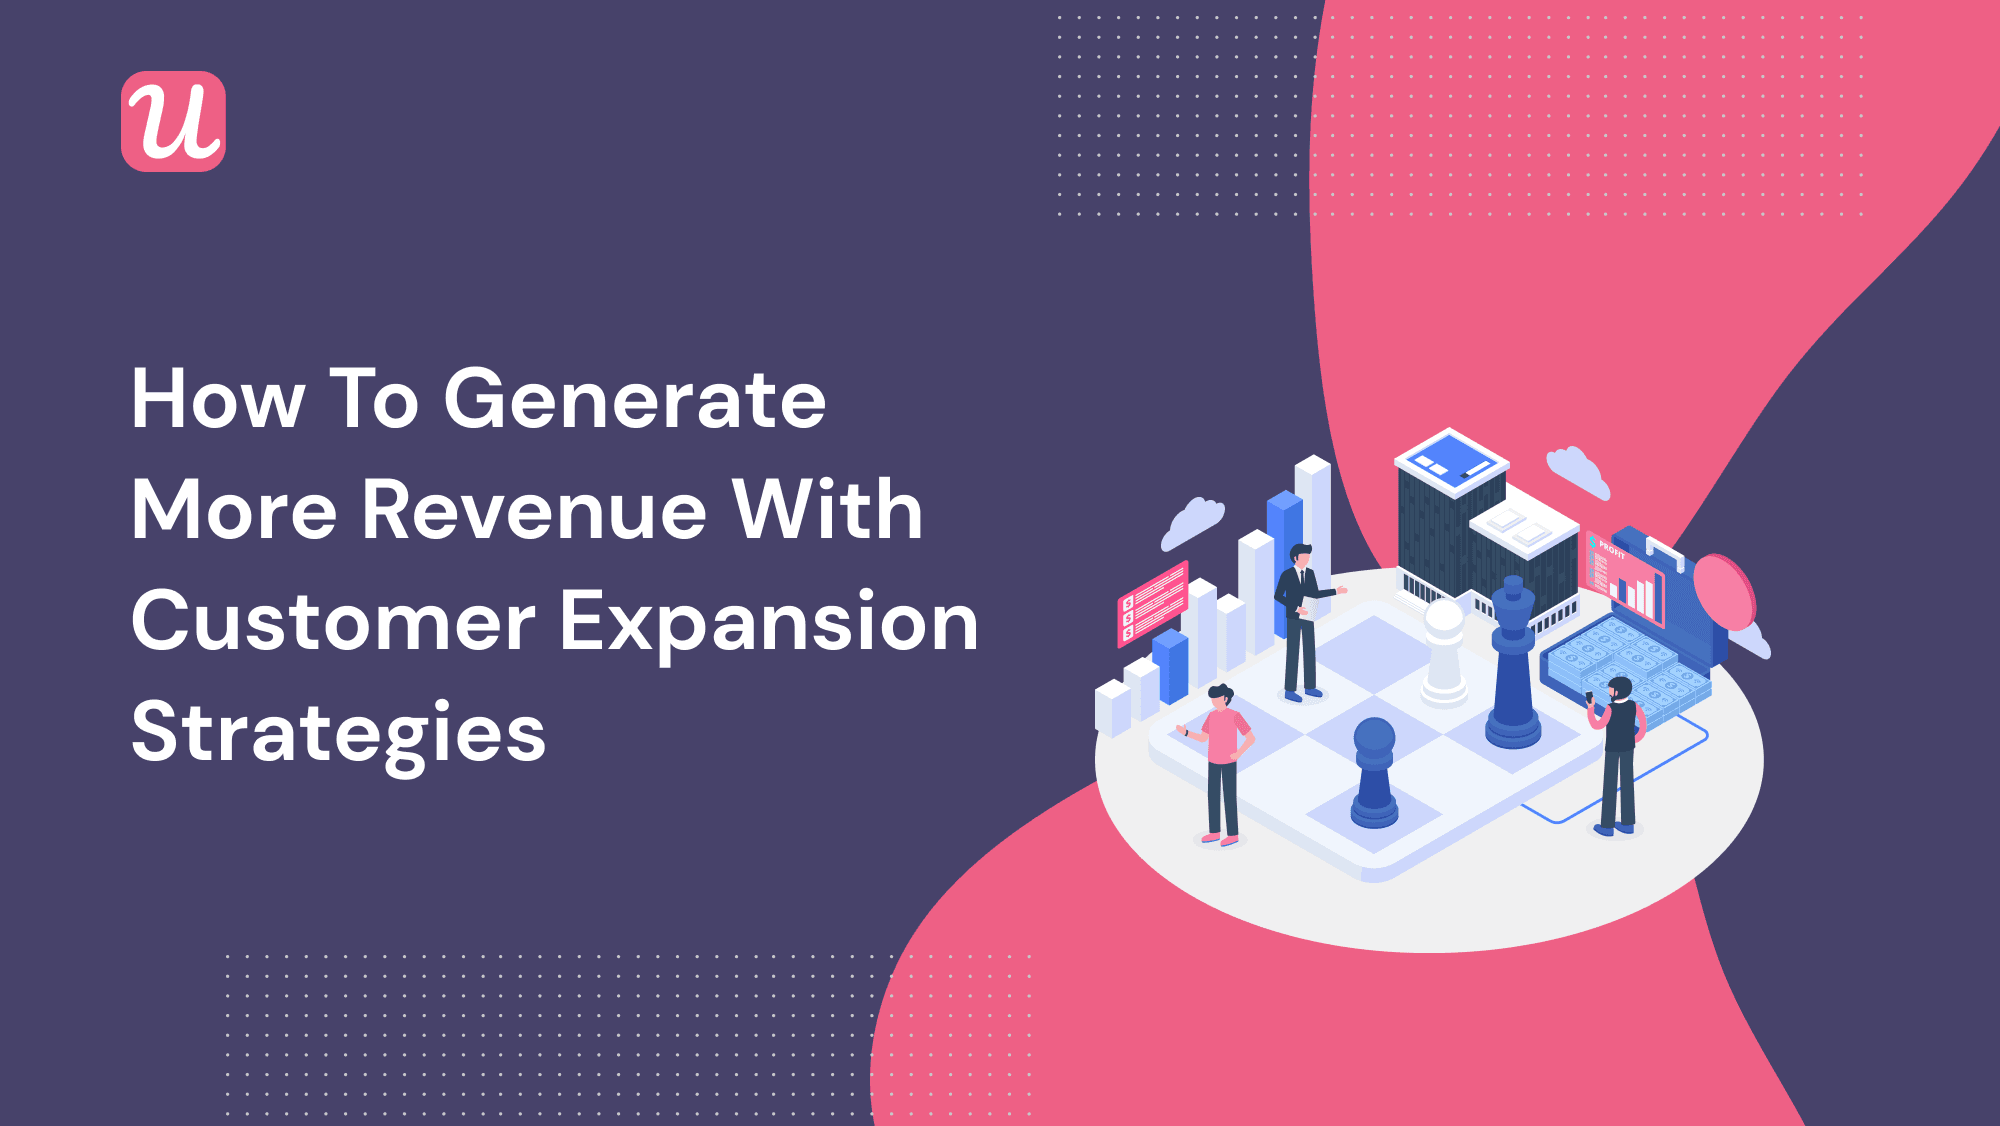 How To Generate More Revenue With Customer Expansion Strategies